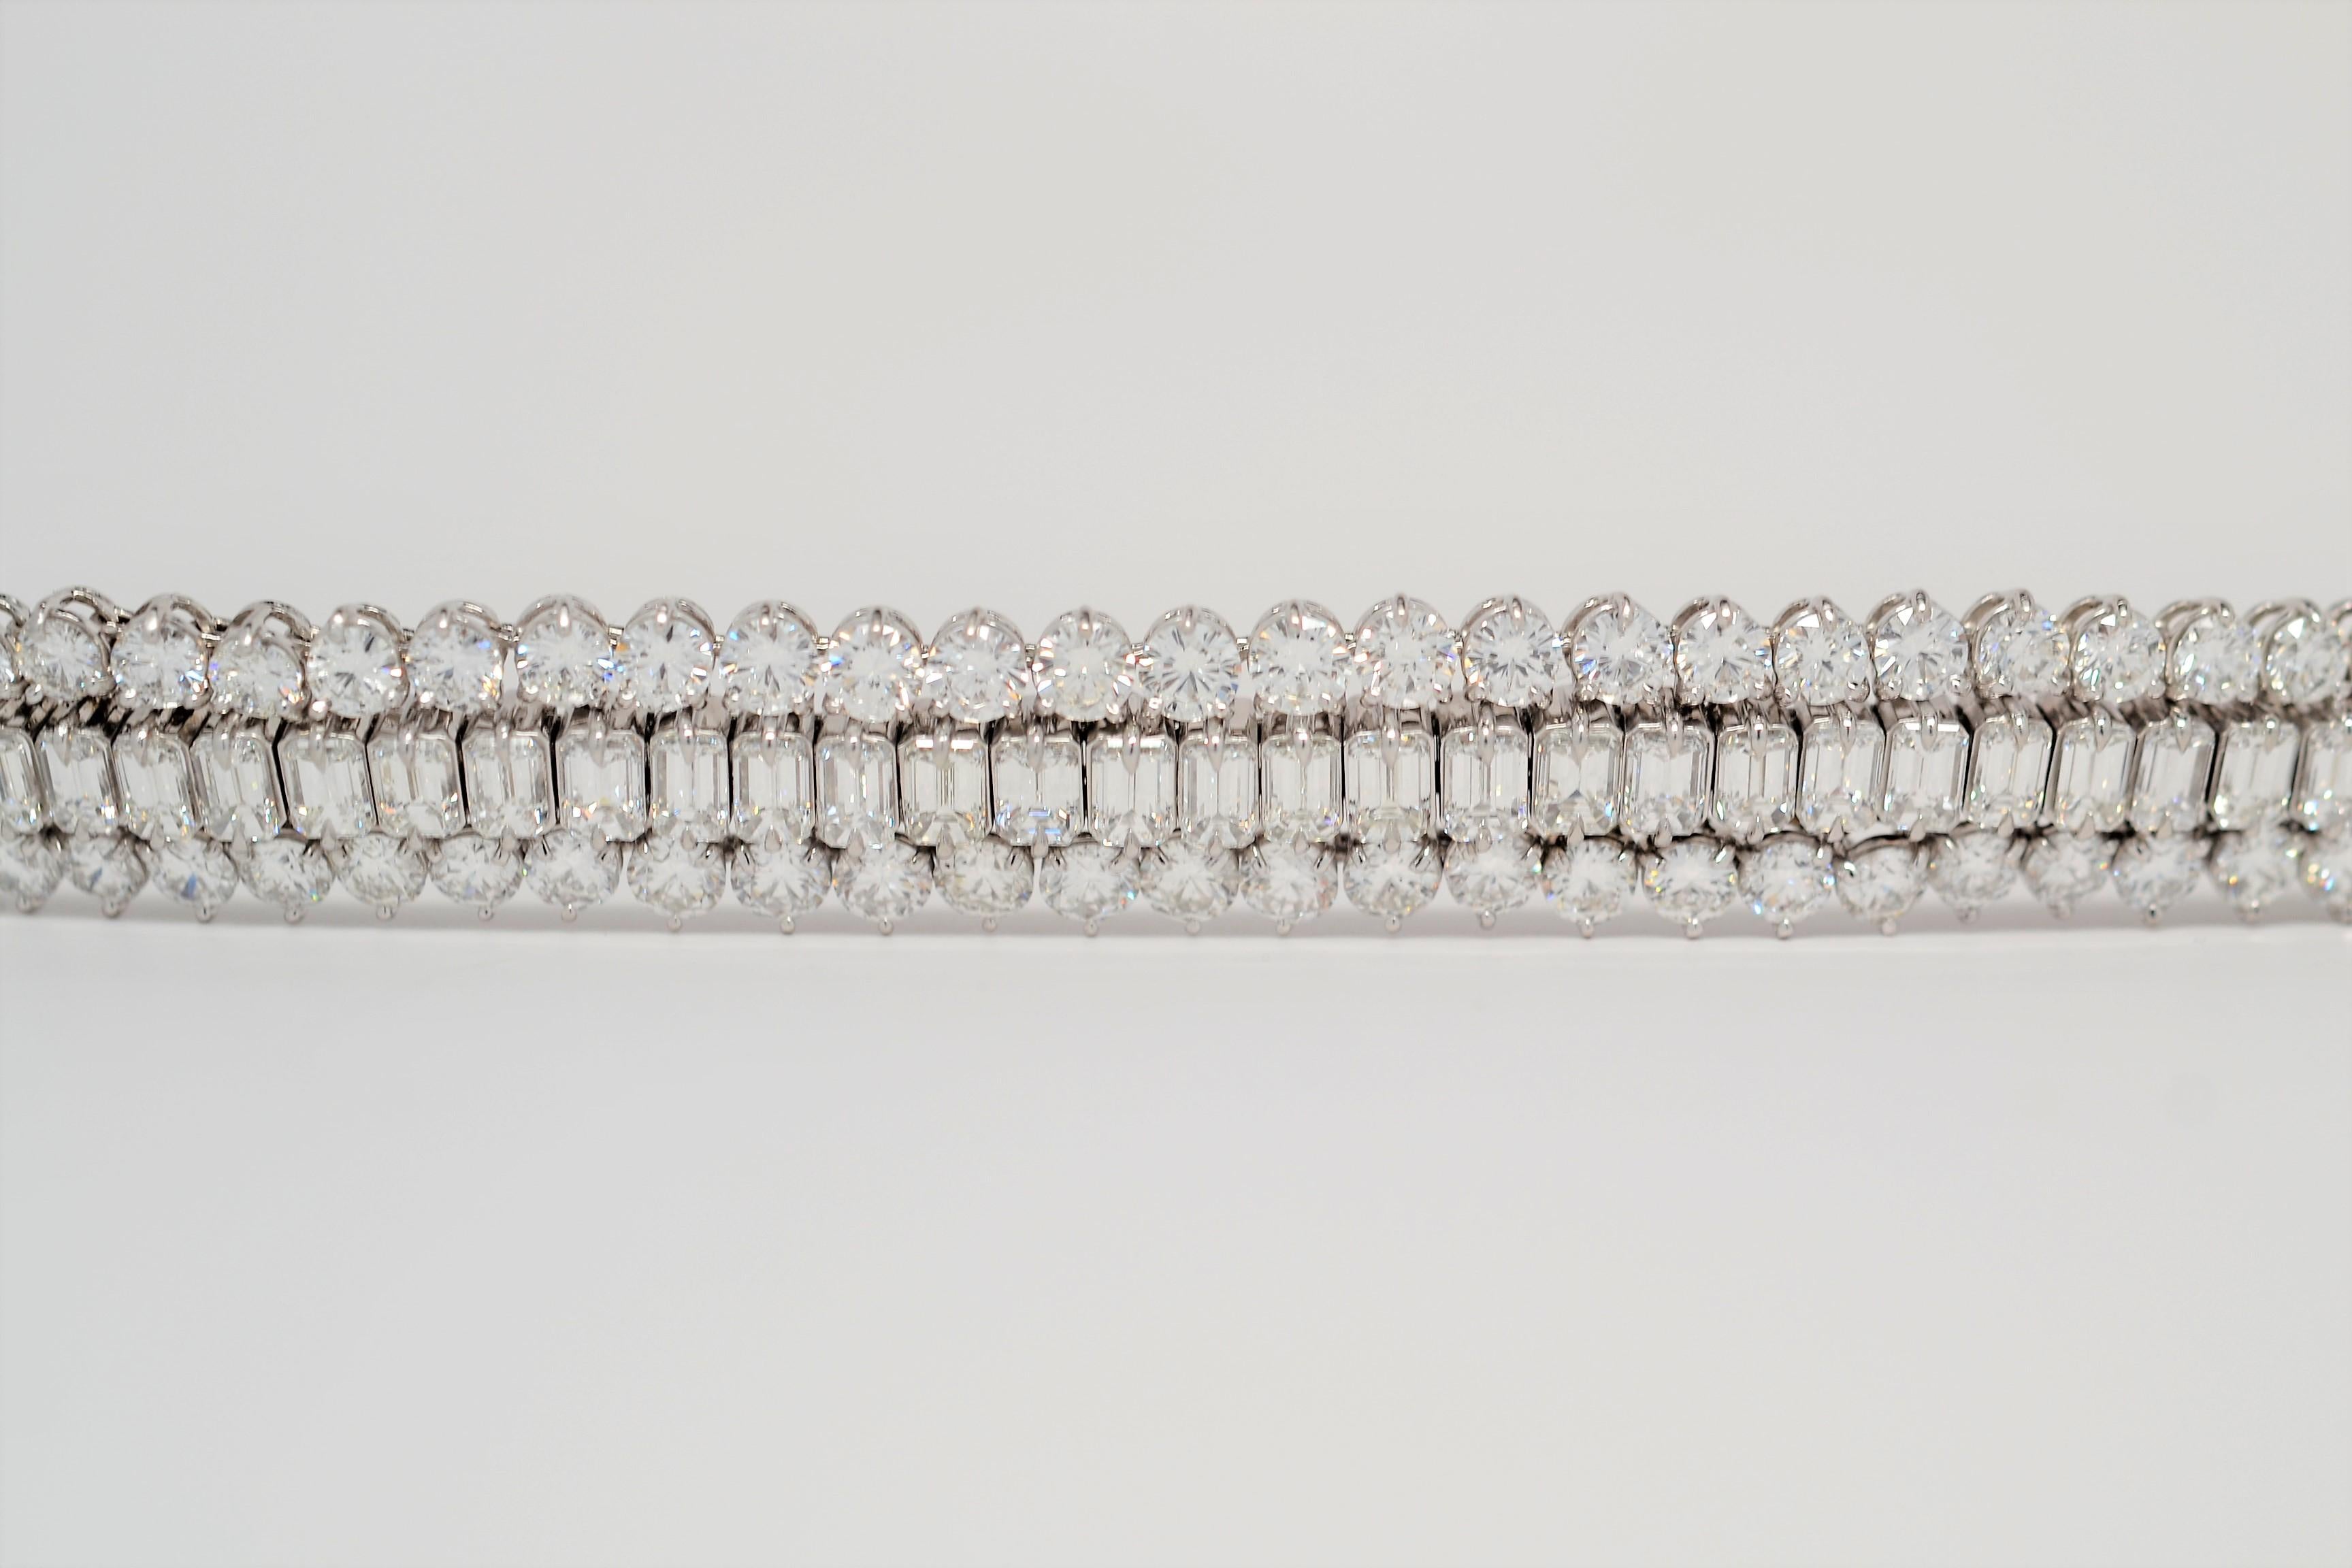 A unique statement piece, this handmade Platinum bracelet is set with Emerald Cut and Round Brilliant Cut Diamonds. A three row layout is set with calibrated Round Brilliant Cut Diamonds on the outside and a center row of Emerald Cut Diamonds. Each